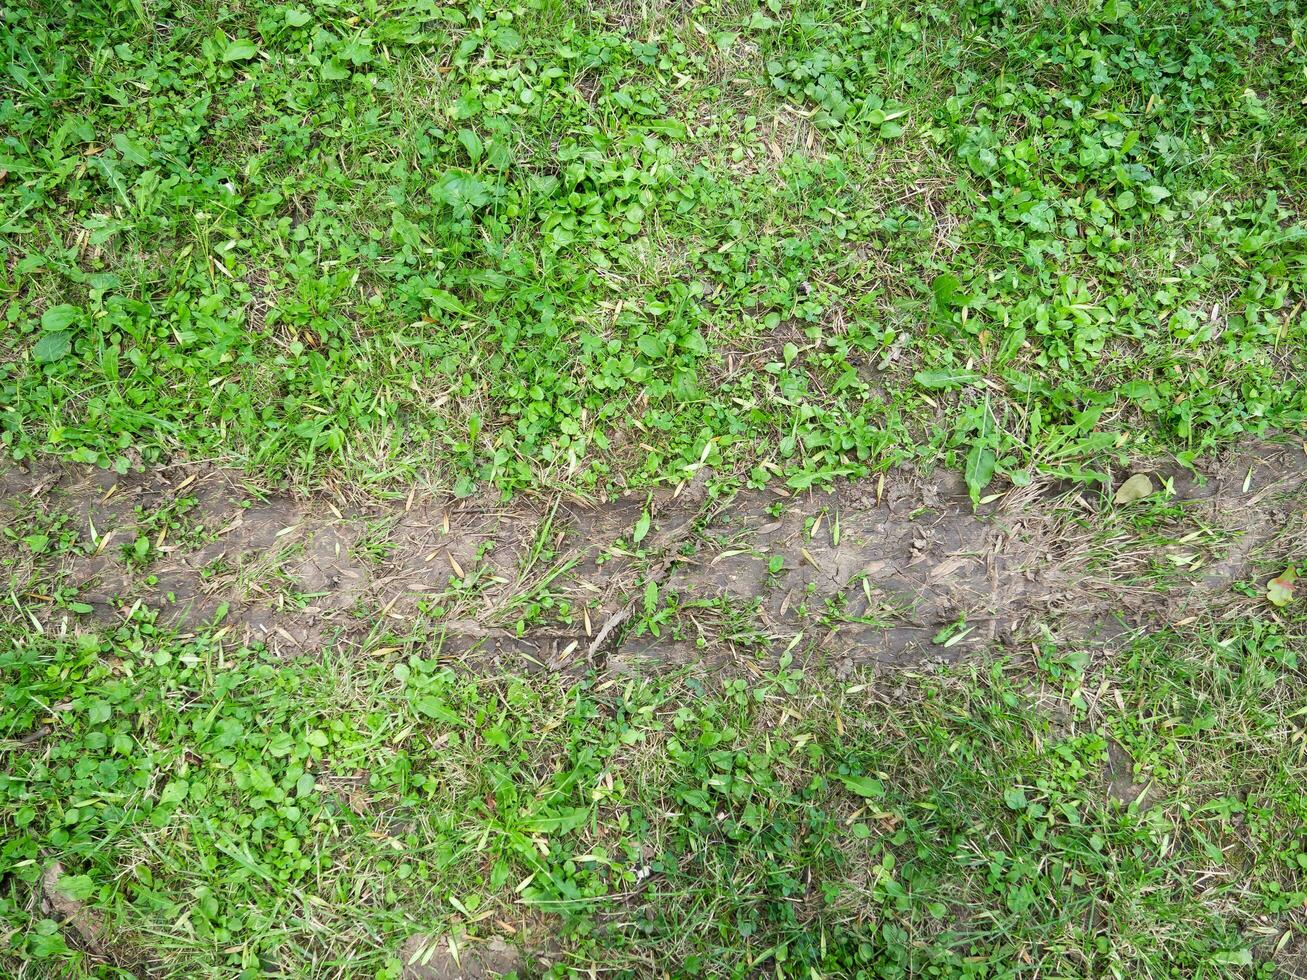 Tire track in the fresh grass field photo